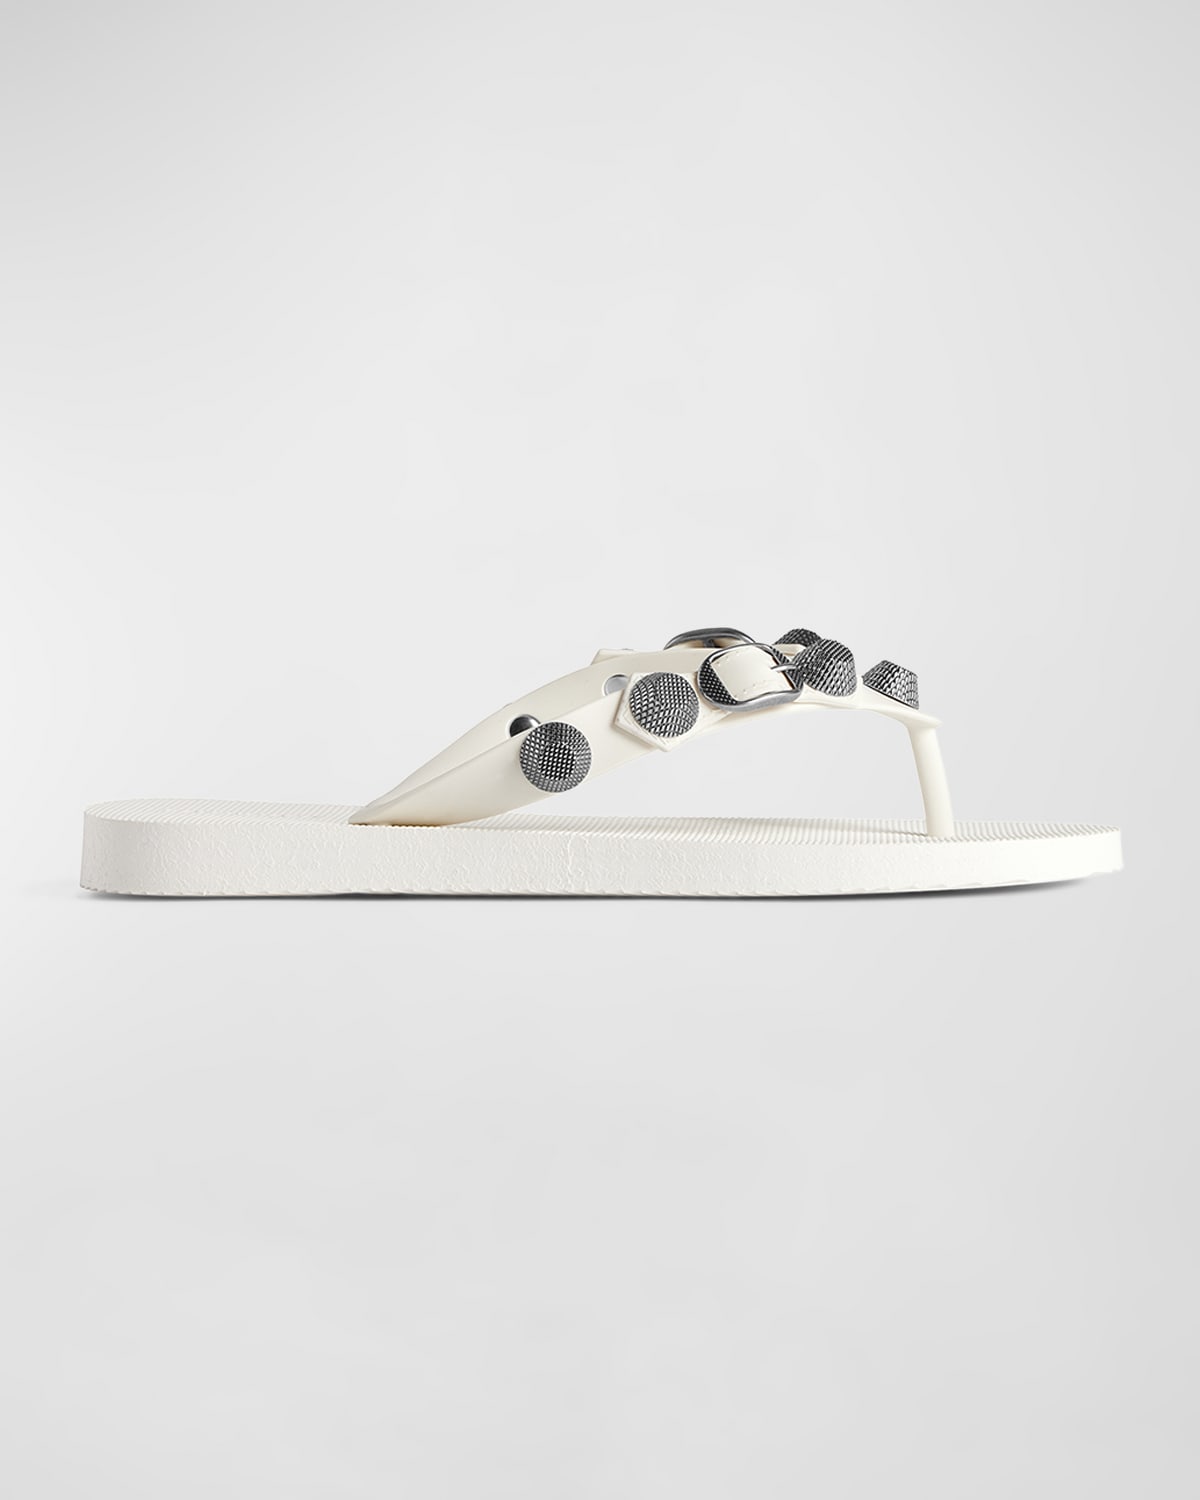 Balenciaga Cagole Studded Flip Flop Sandals In White